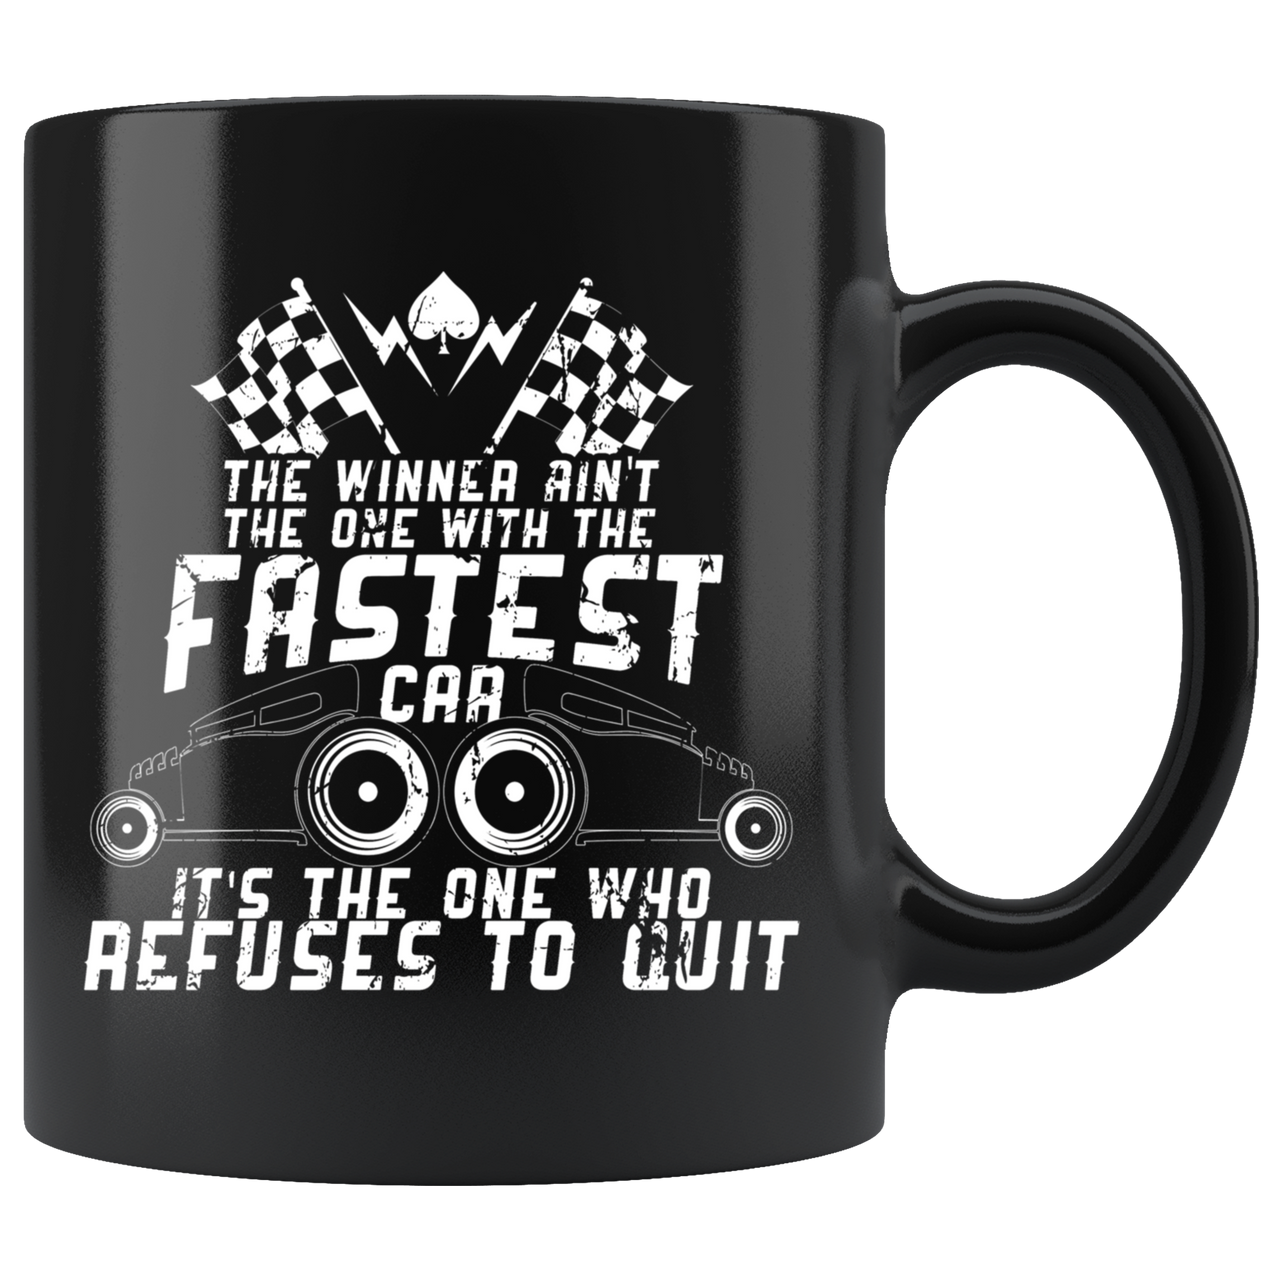 The Winner Ain't The One With The Fastest Car It's The One Who Refused To Quit Mug!